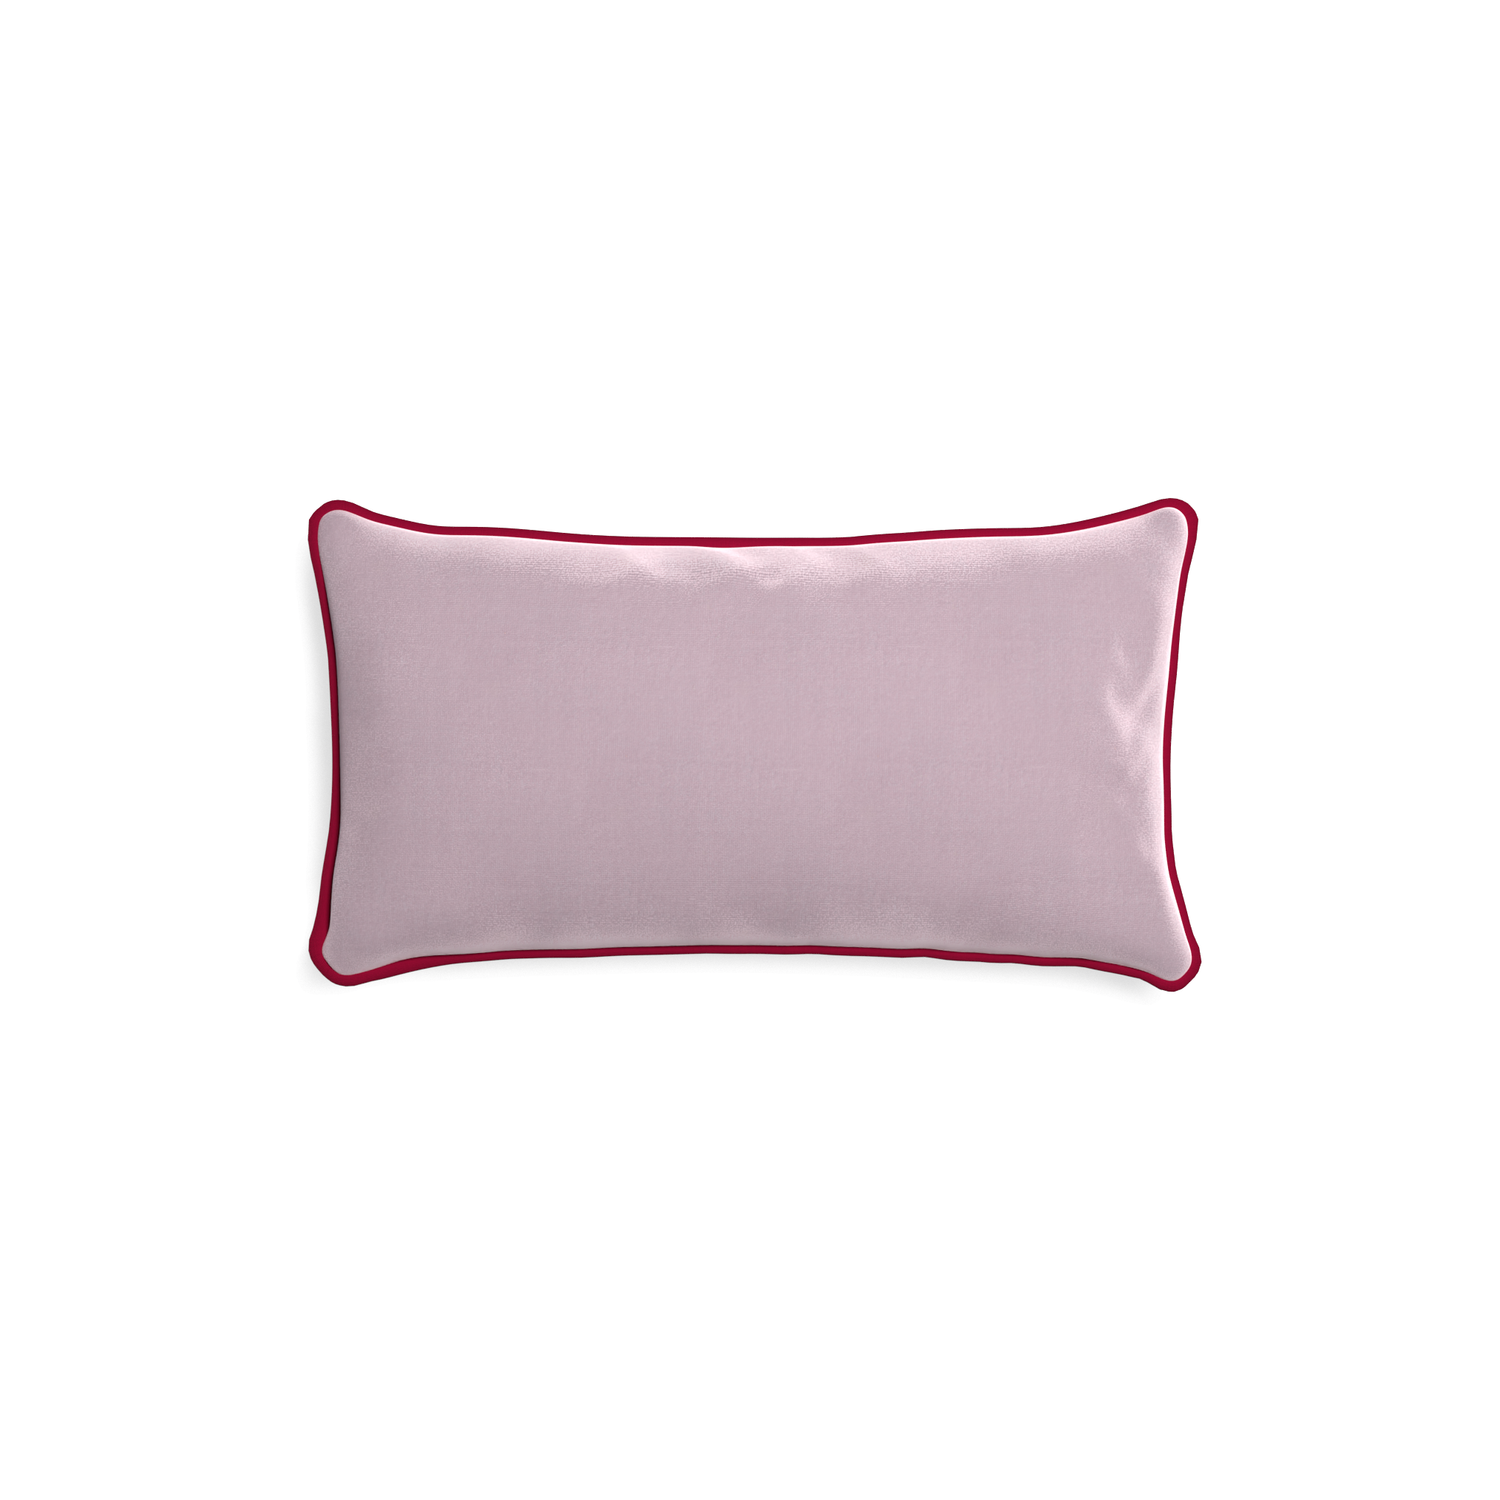 rectangle lilac velvet pillow with dark red piping